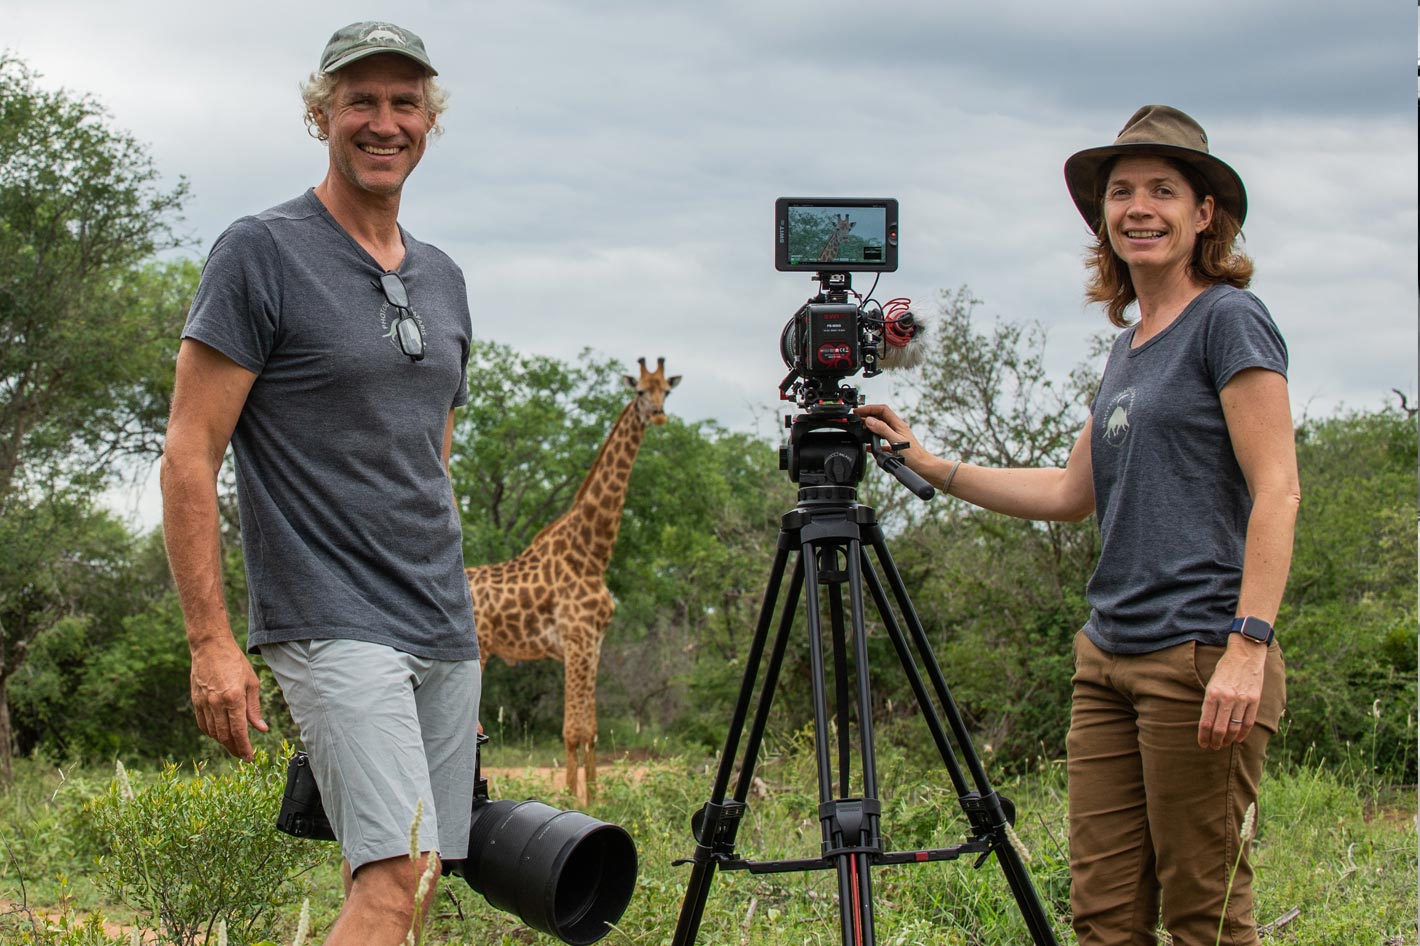 Noa Koefler and Hannes Lochner: a passion for wildlife